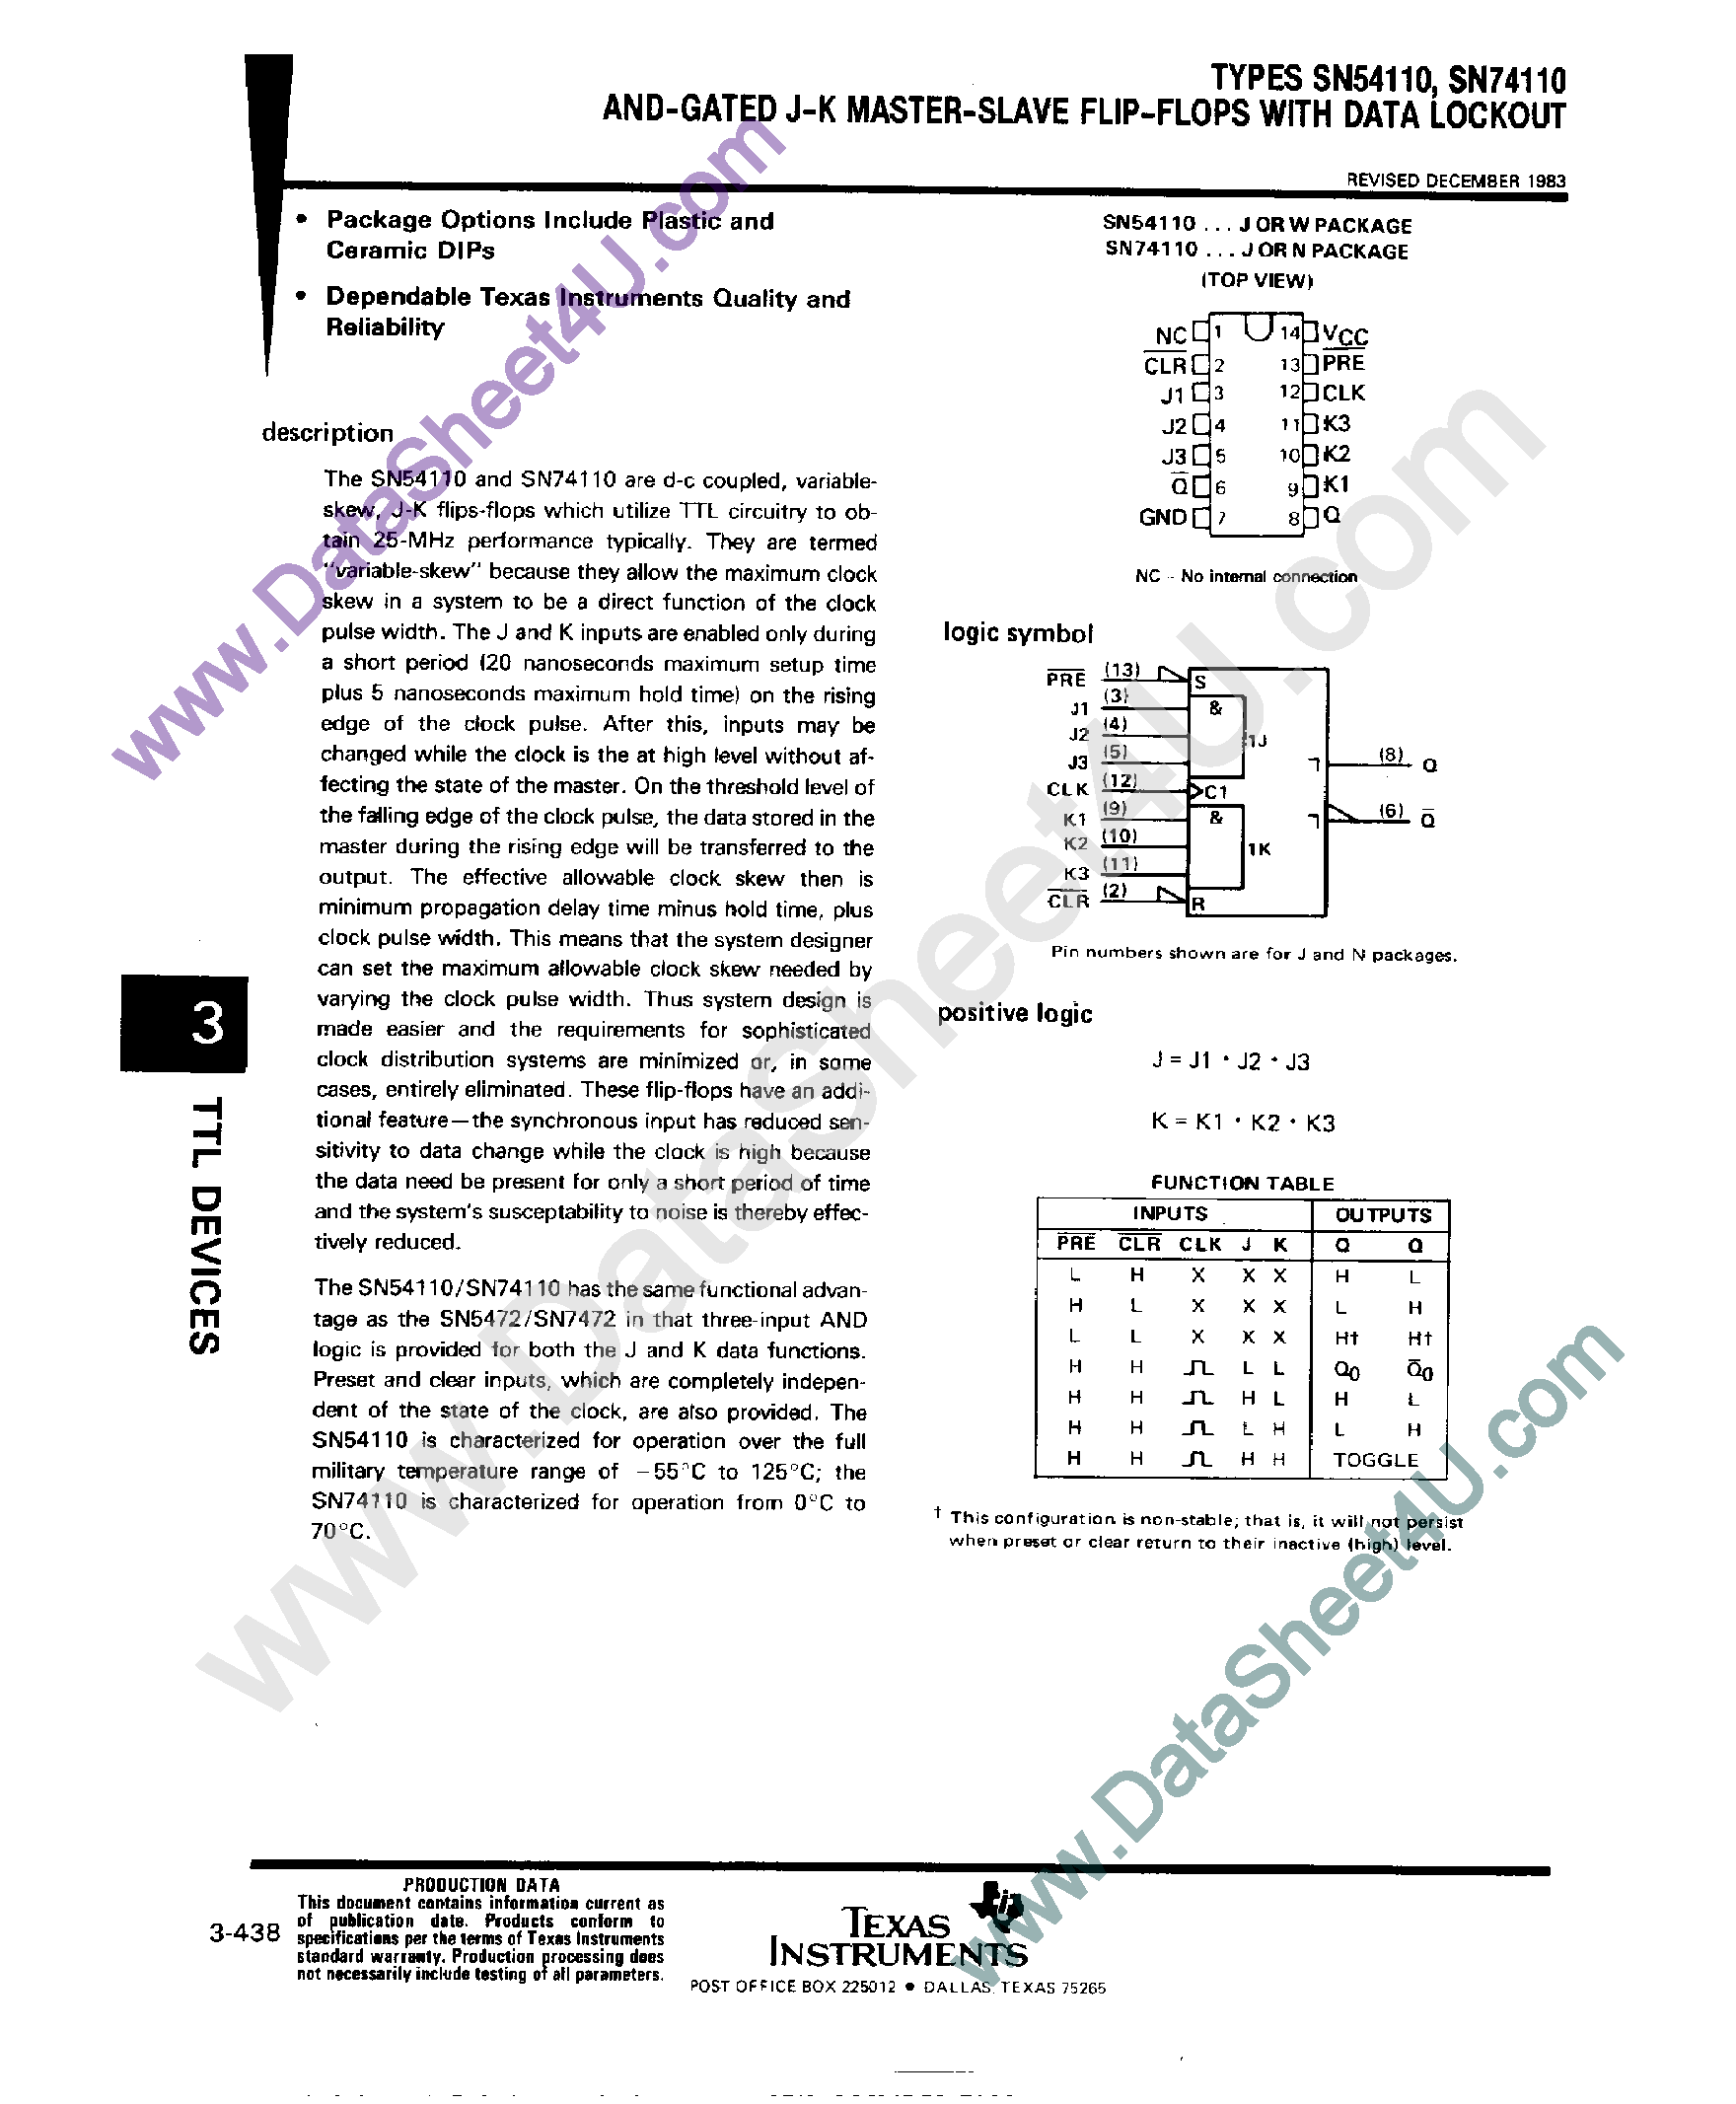 Datasheet SN74110 - AND Gated J-K Master Slave F-F with Data Lockout page 1